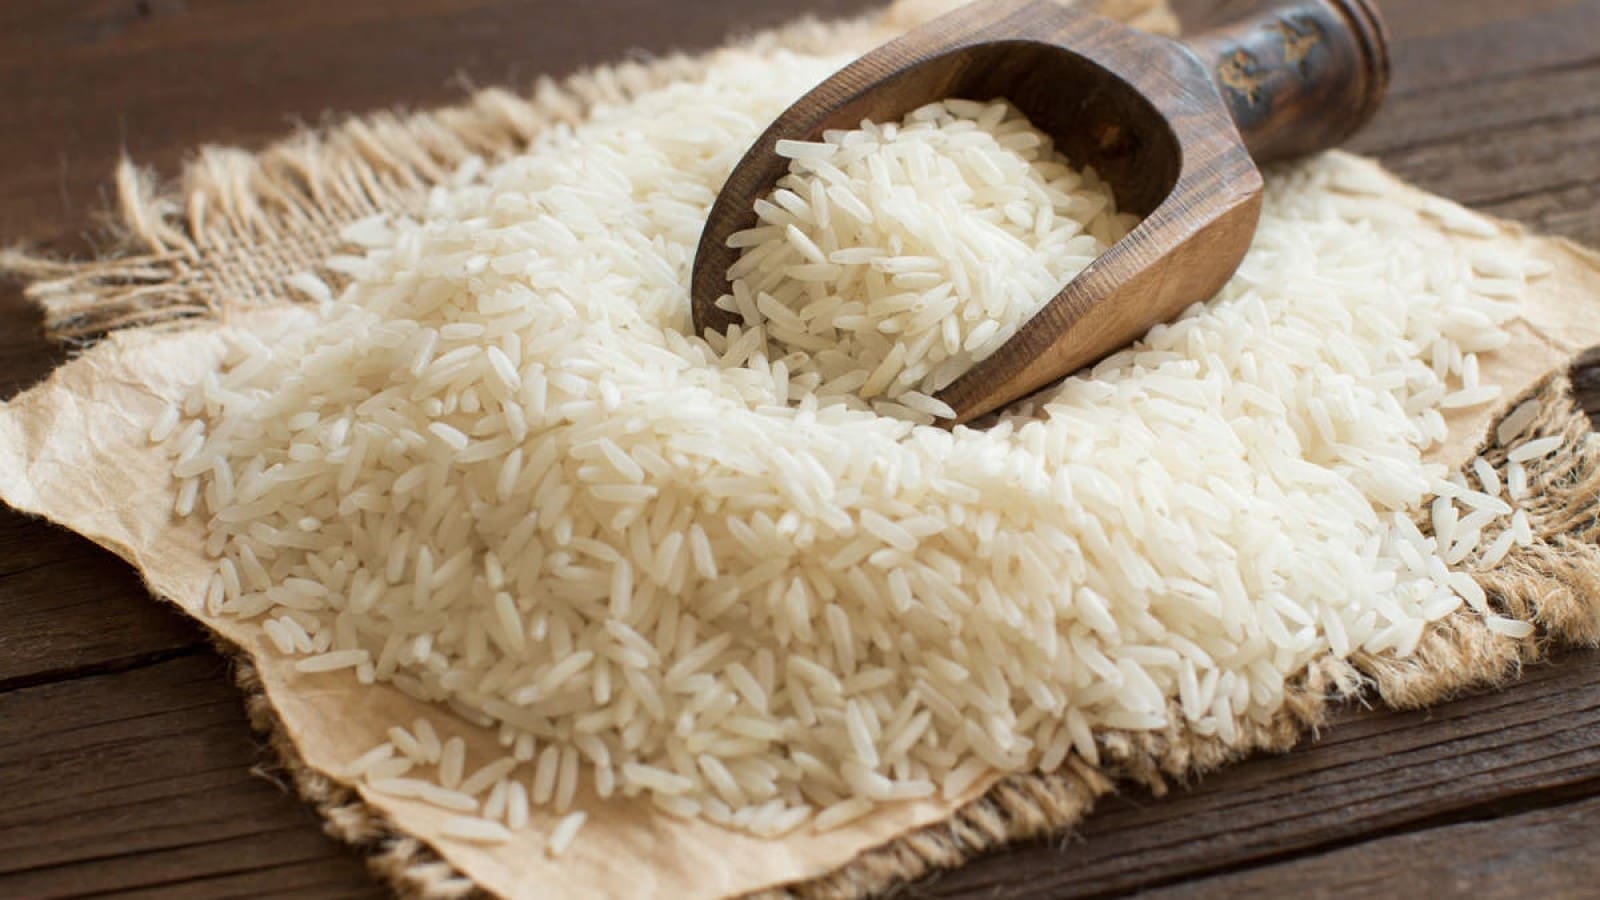 Cote d’Ivoire’s rice import from China hit record in 3 months as India tightens restrictions